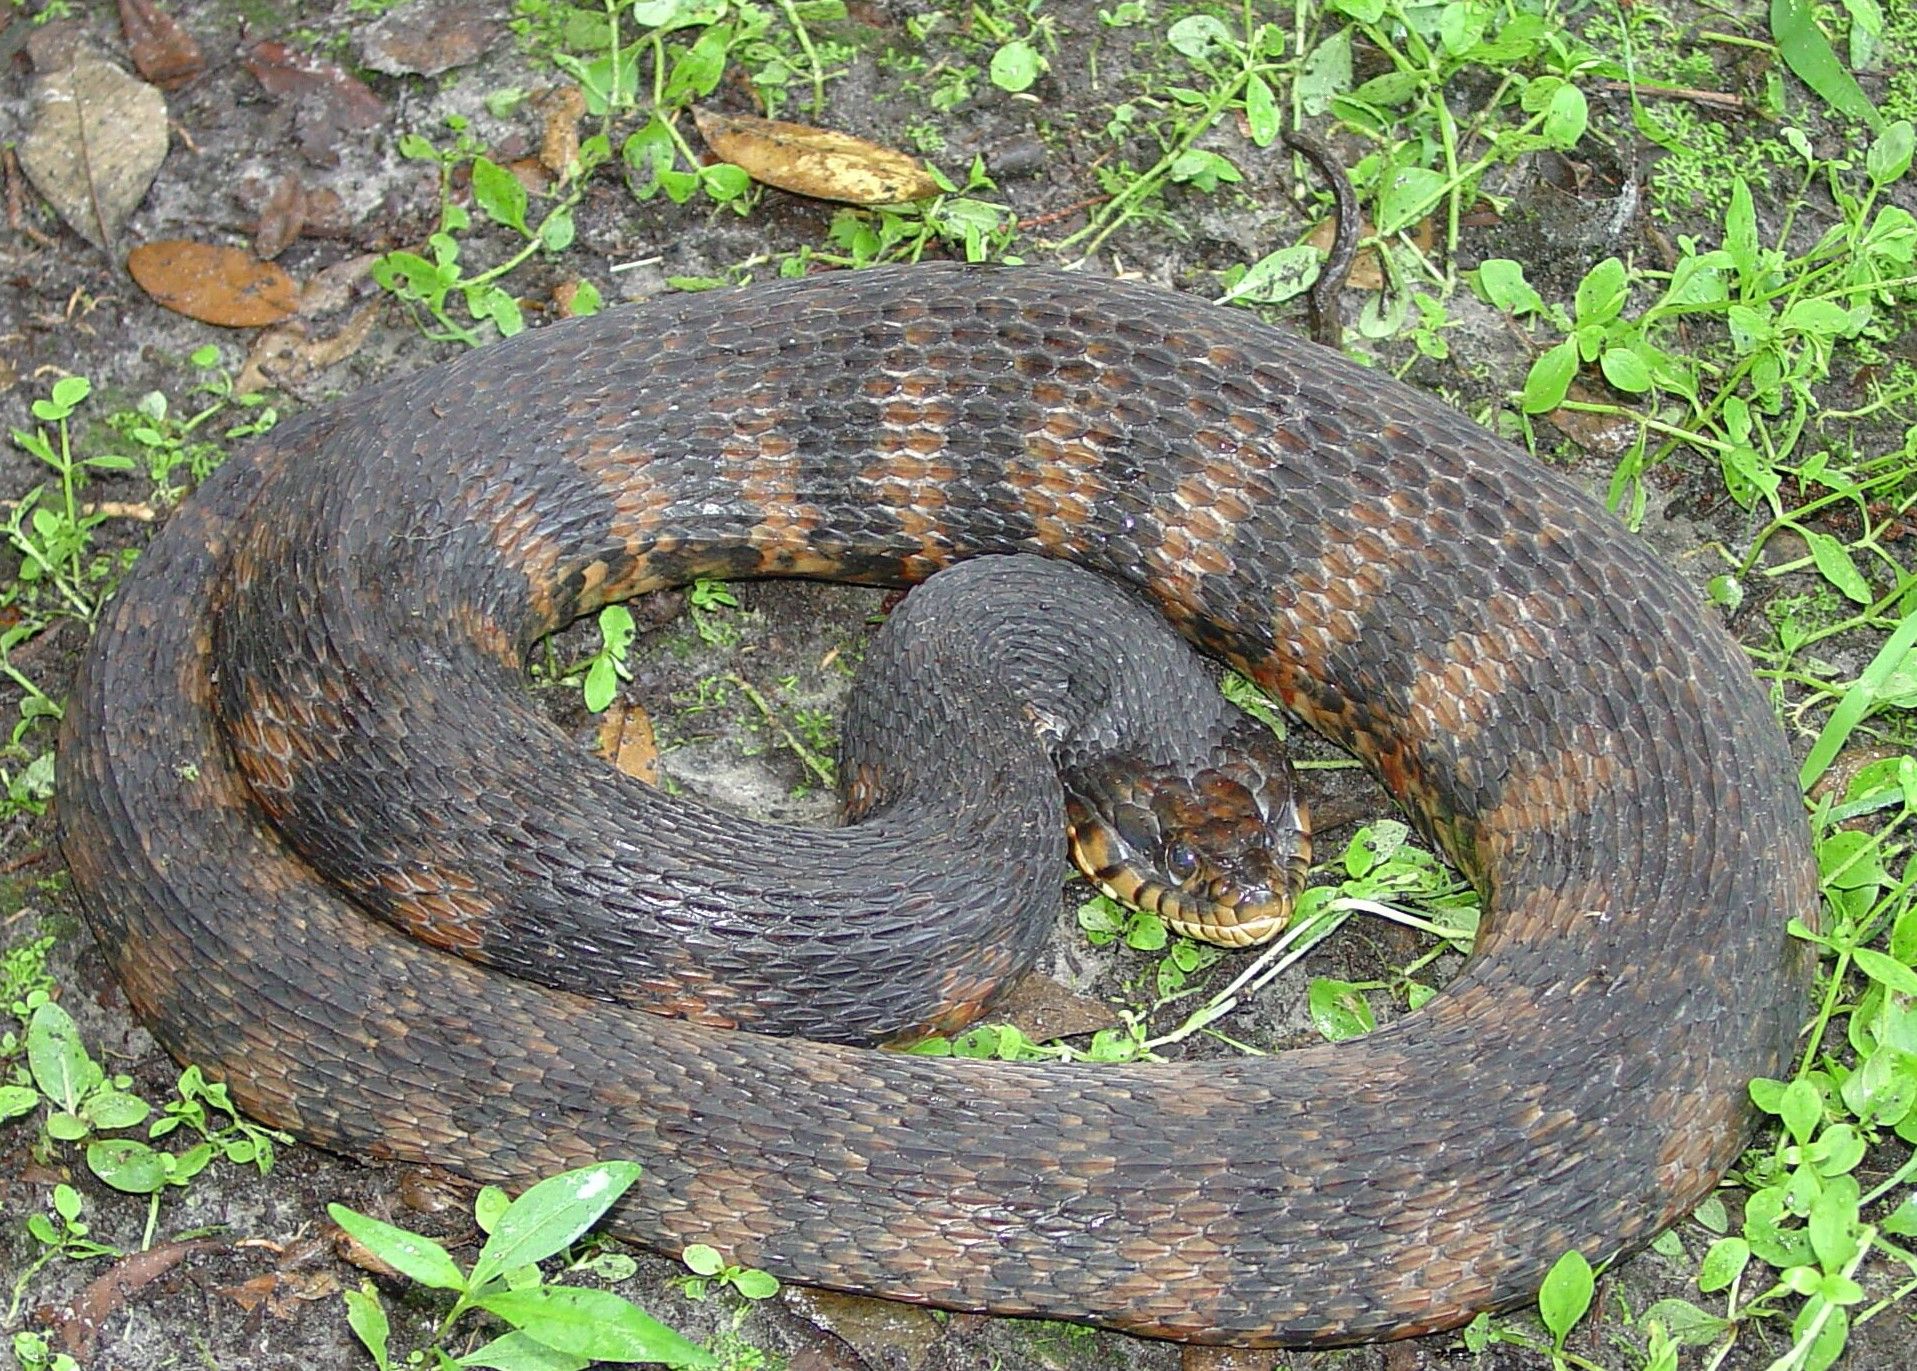 Figure 12. Banded water snake (adult) showing typical banded pattern. This snake feels threatened and has flattened its head and puffed up its body to look more intimidating.